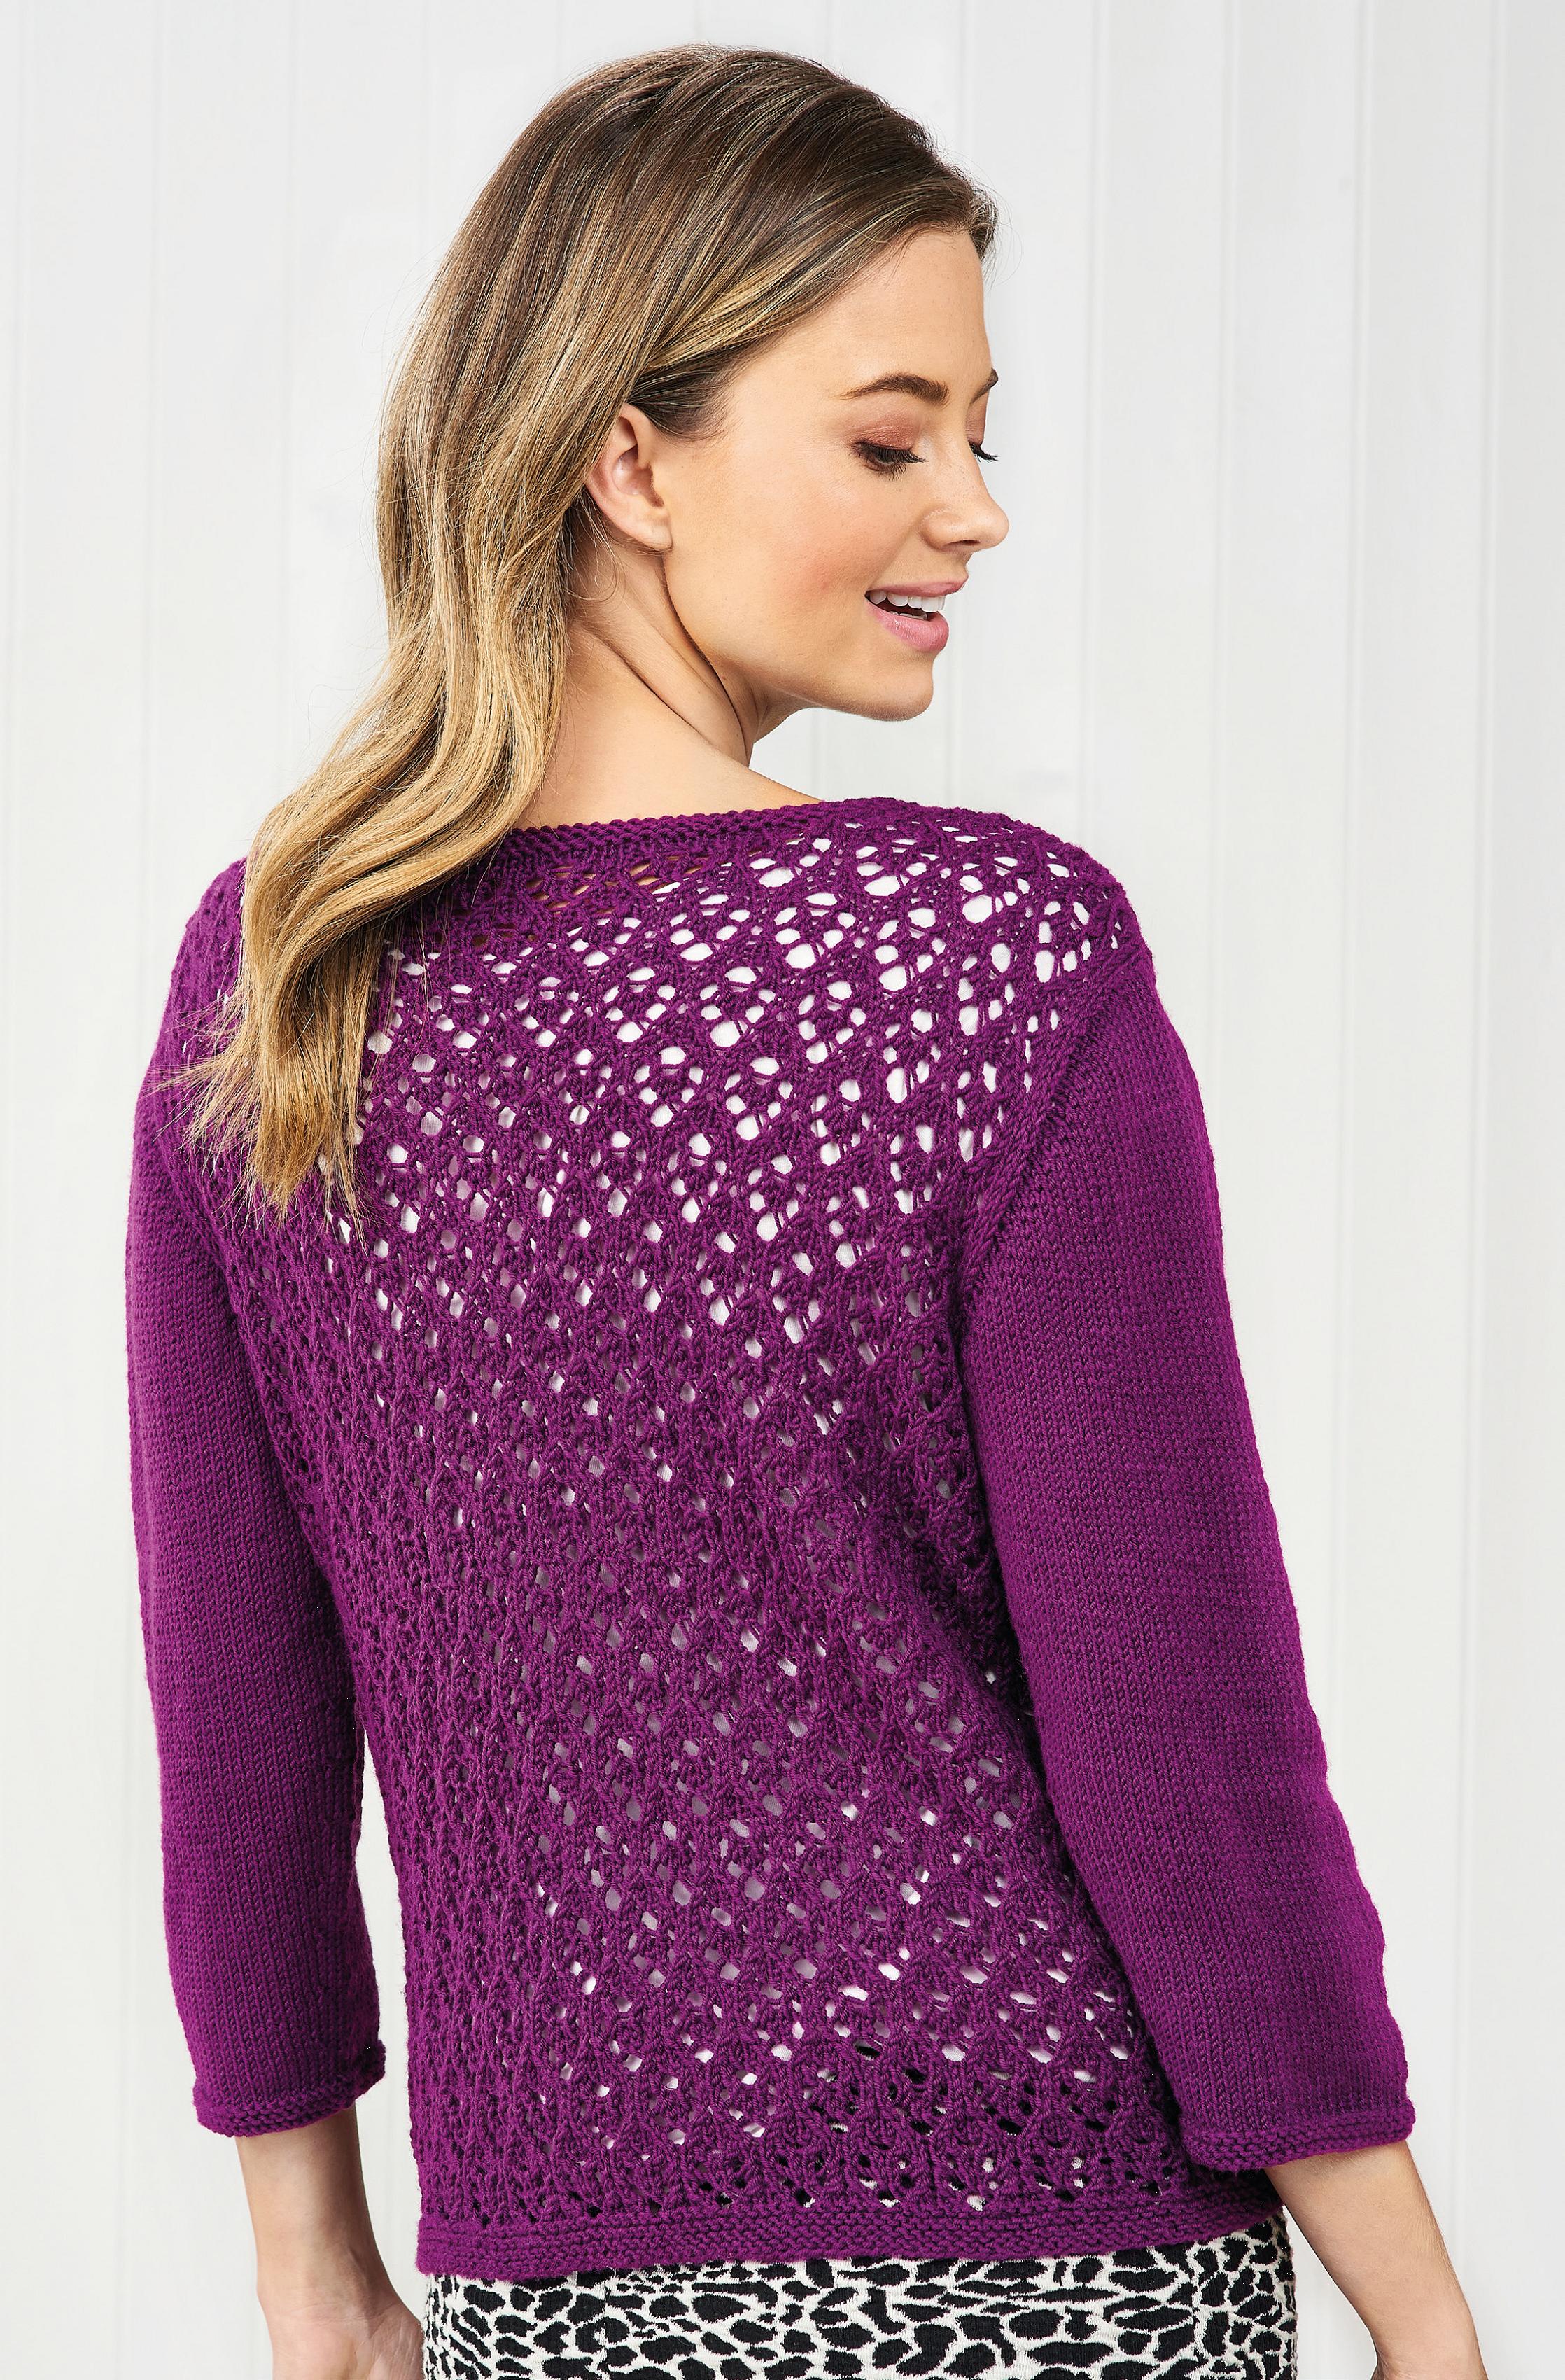 All-over Lace Cardigan, Knitting Patterns